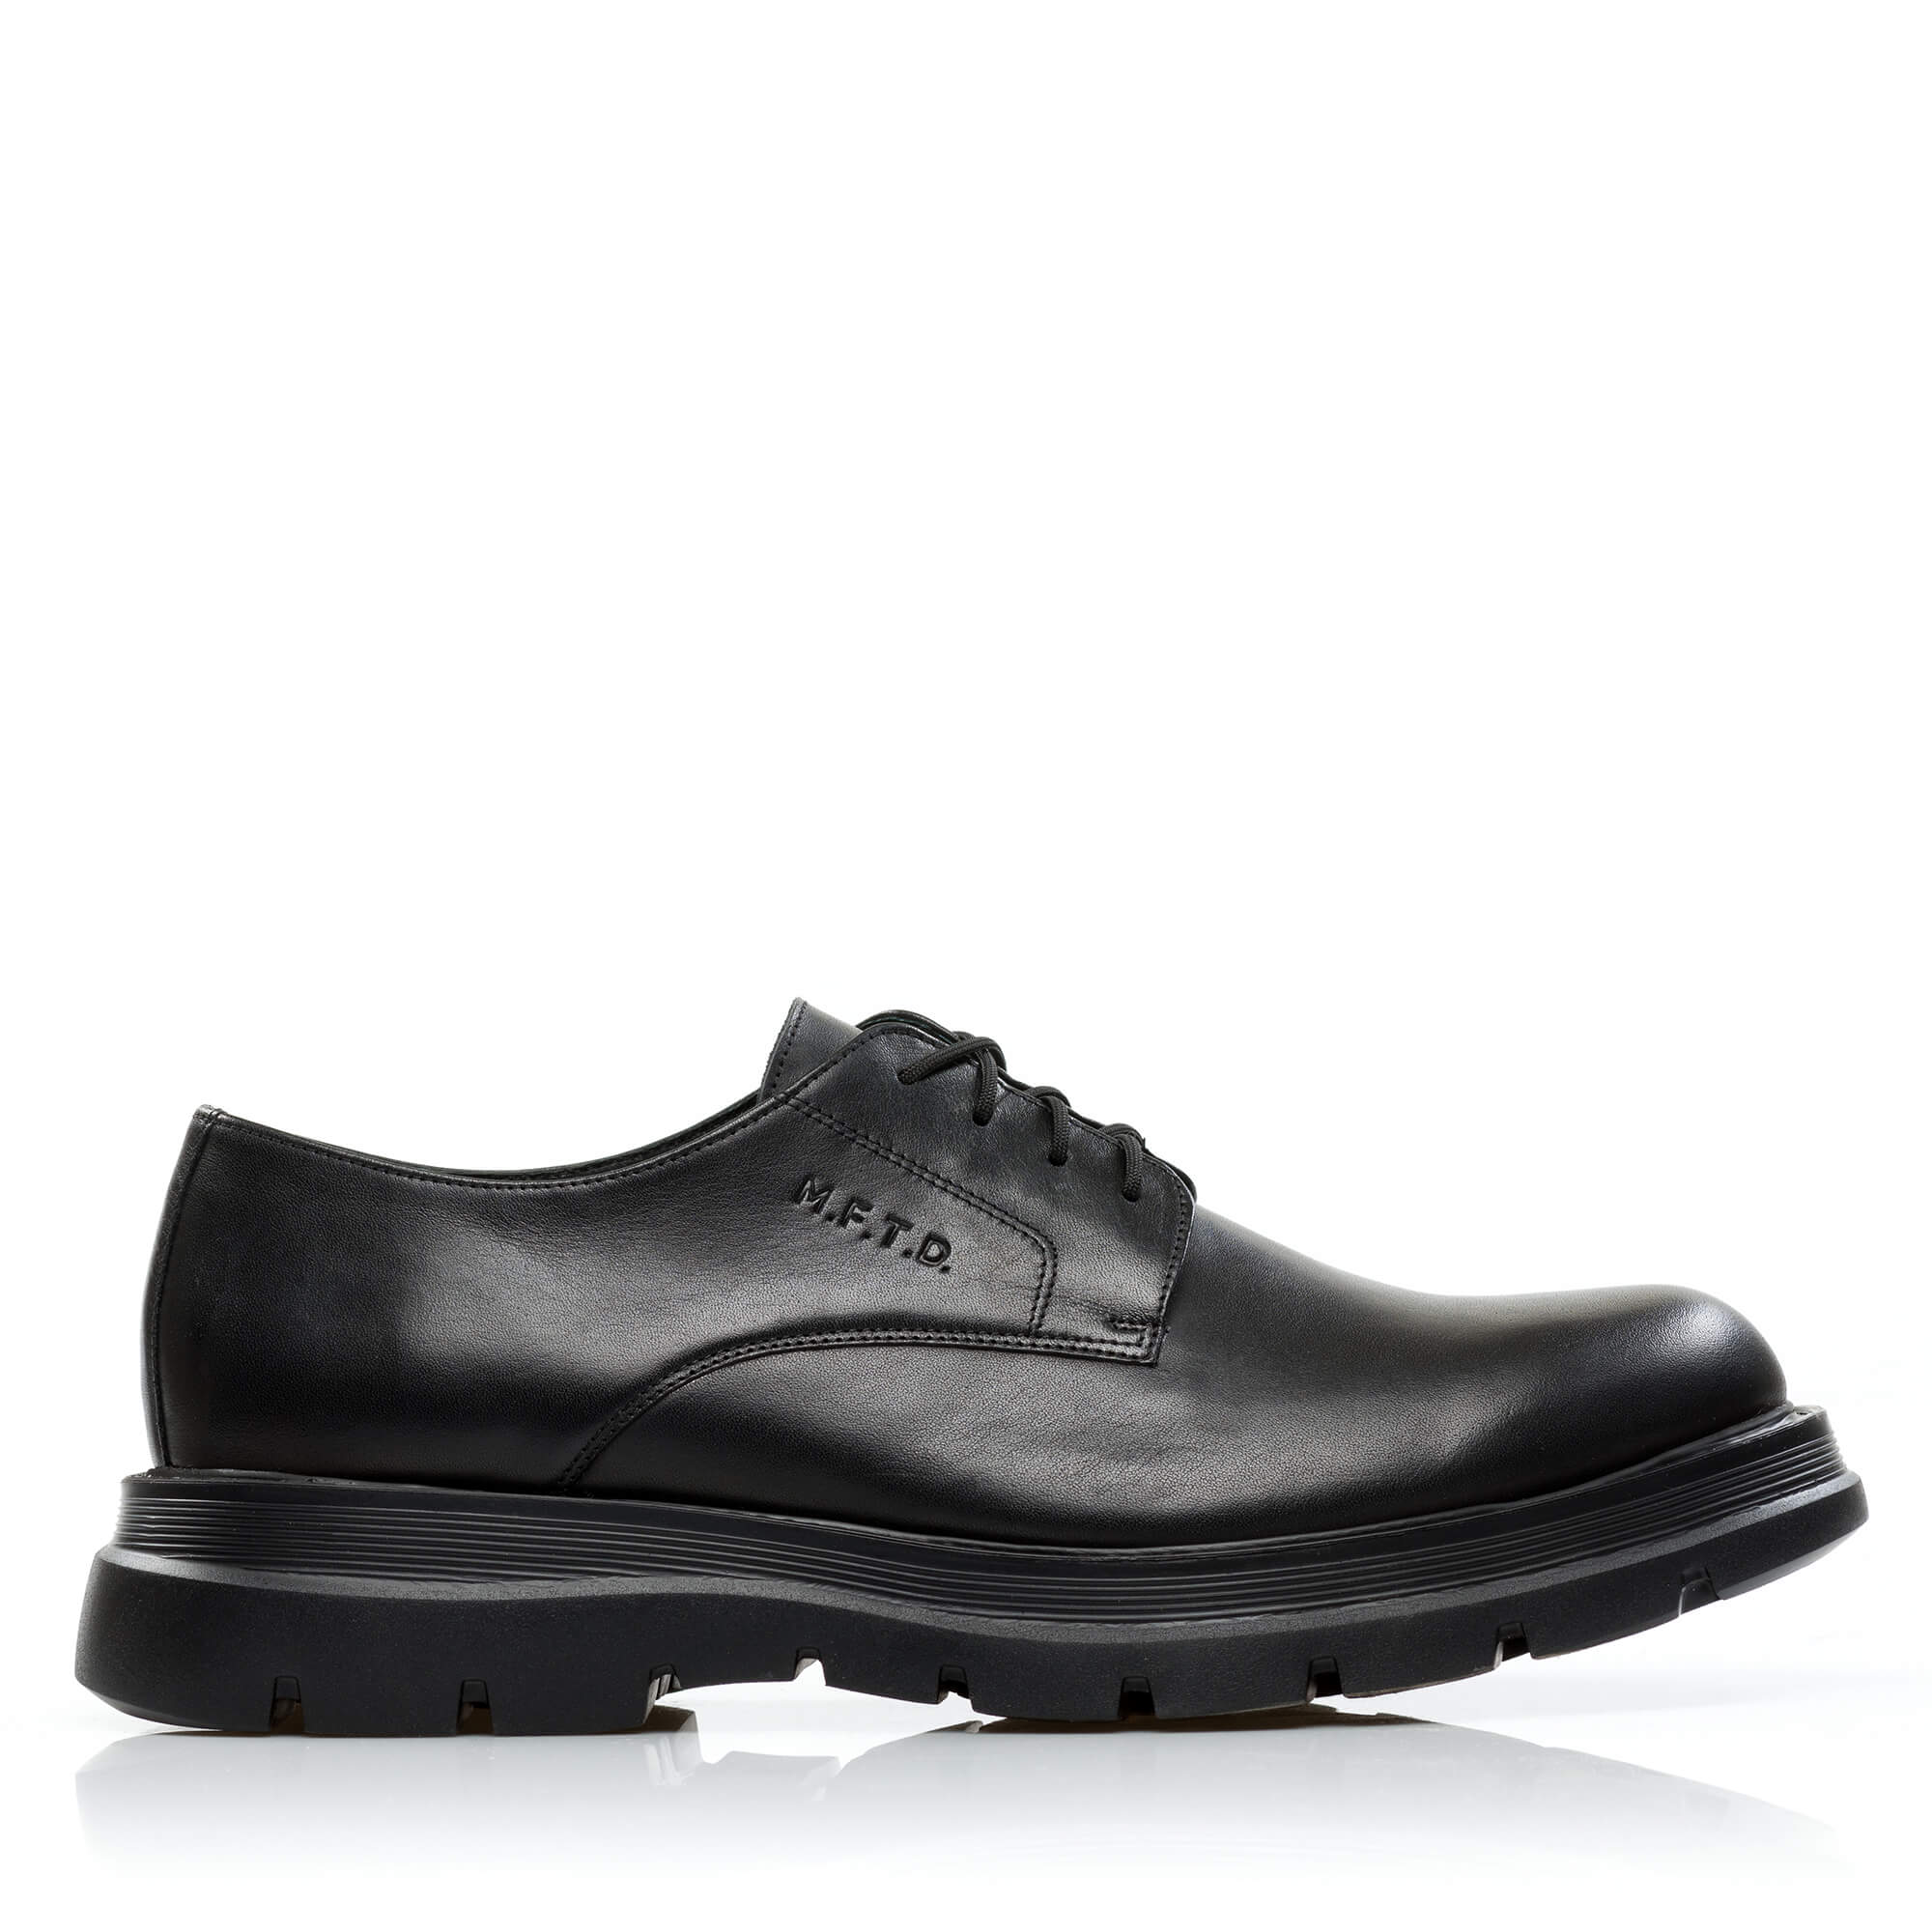 THICK SOLED LEATHER DERBY SHOES